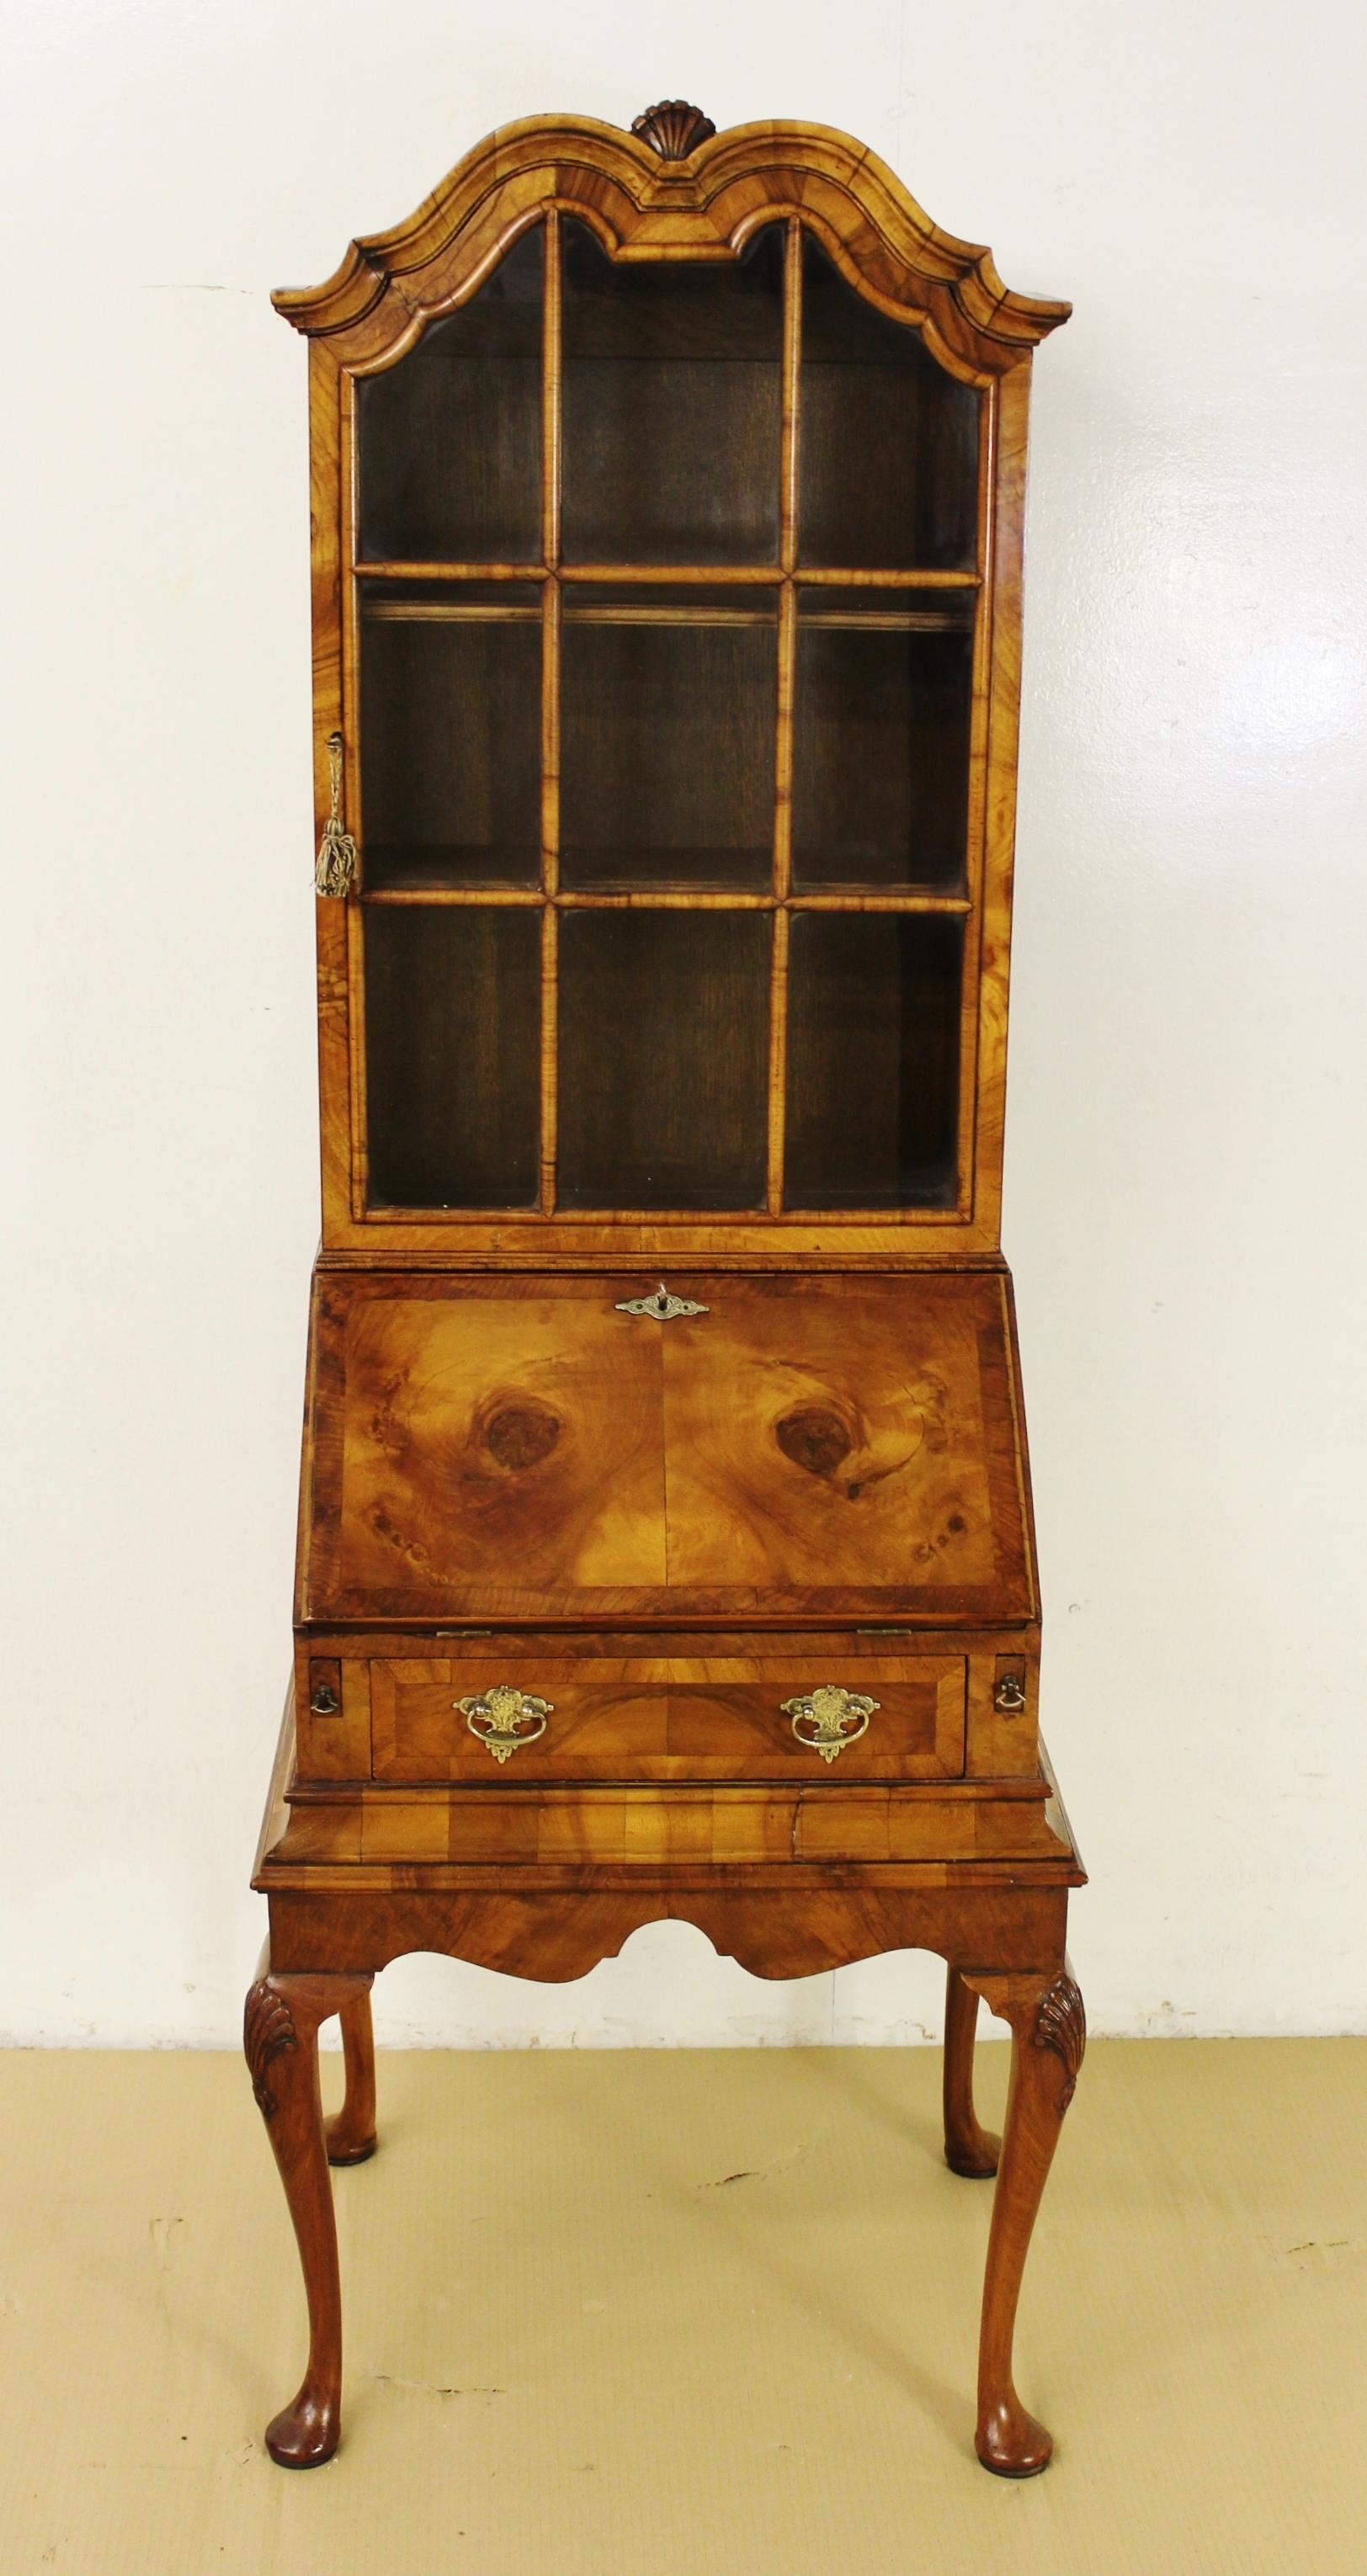 A superb Queen Anne style burr walnut bureau bookcase. Of excellent construction in solid walnut and attractive burr walnut veneers onto a solid oak carcas. This charming bookcase is of slender proportions but still affords good storage/display